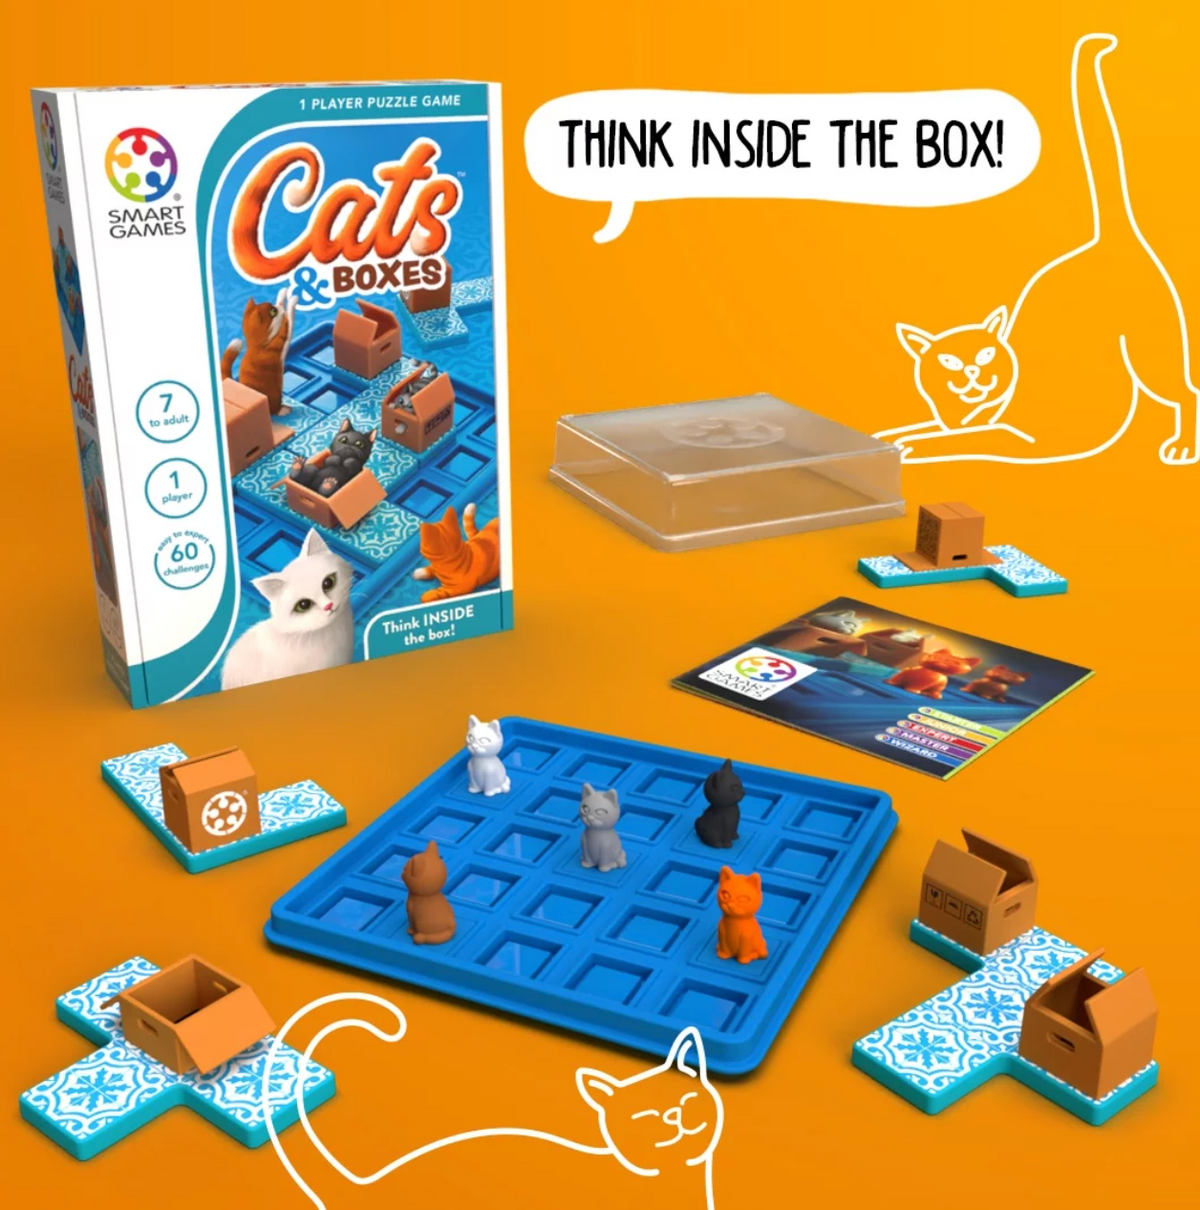 Cats &amp; Boxes Puzzle Game